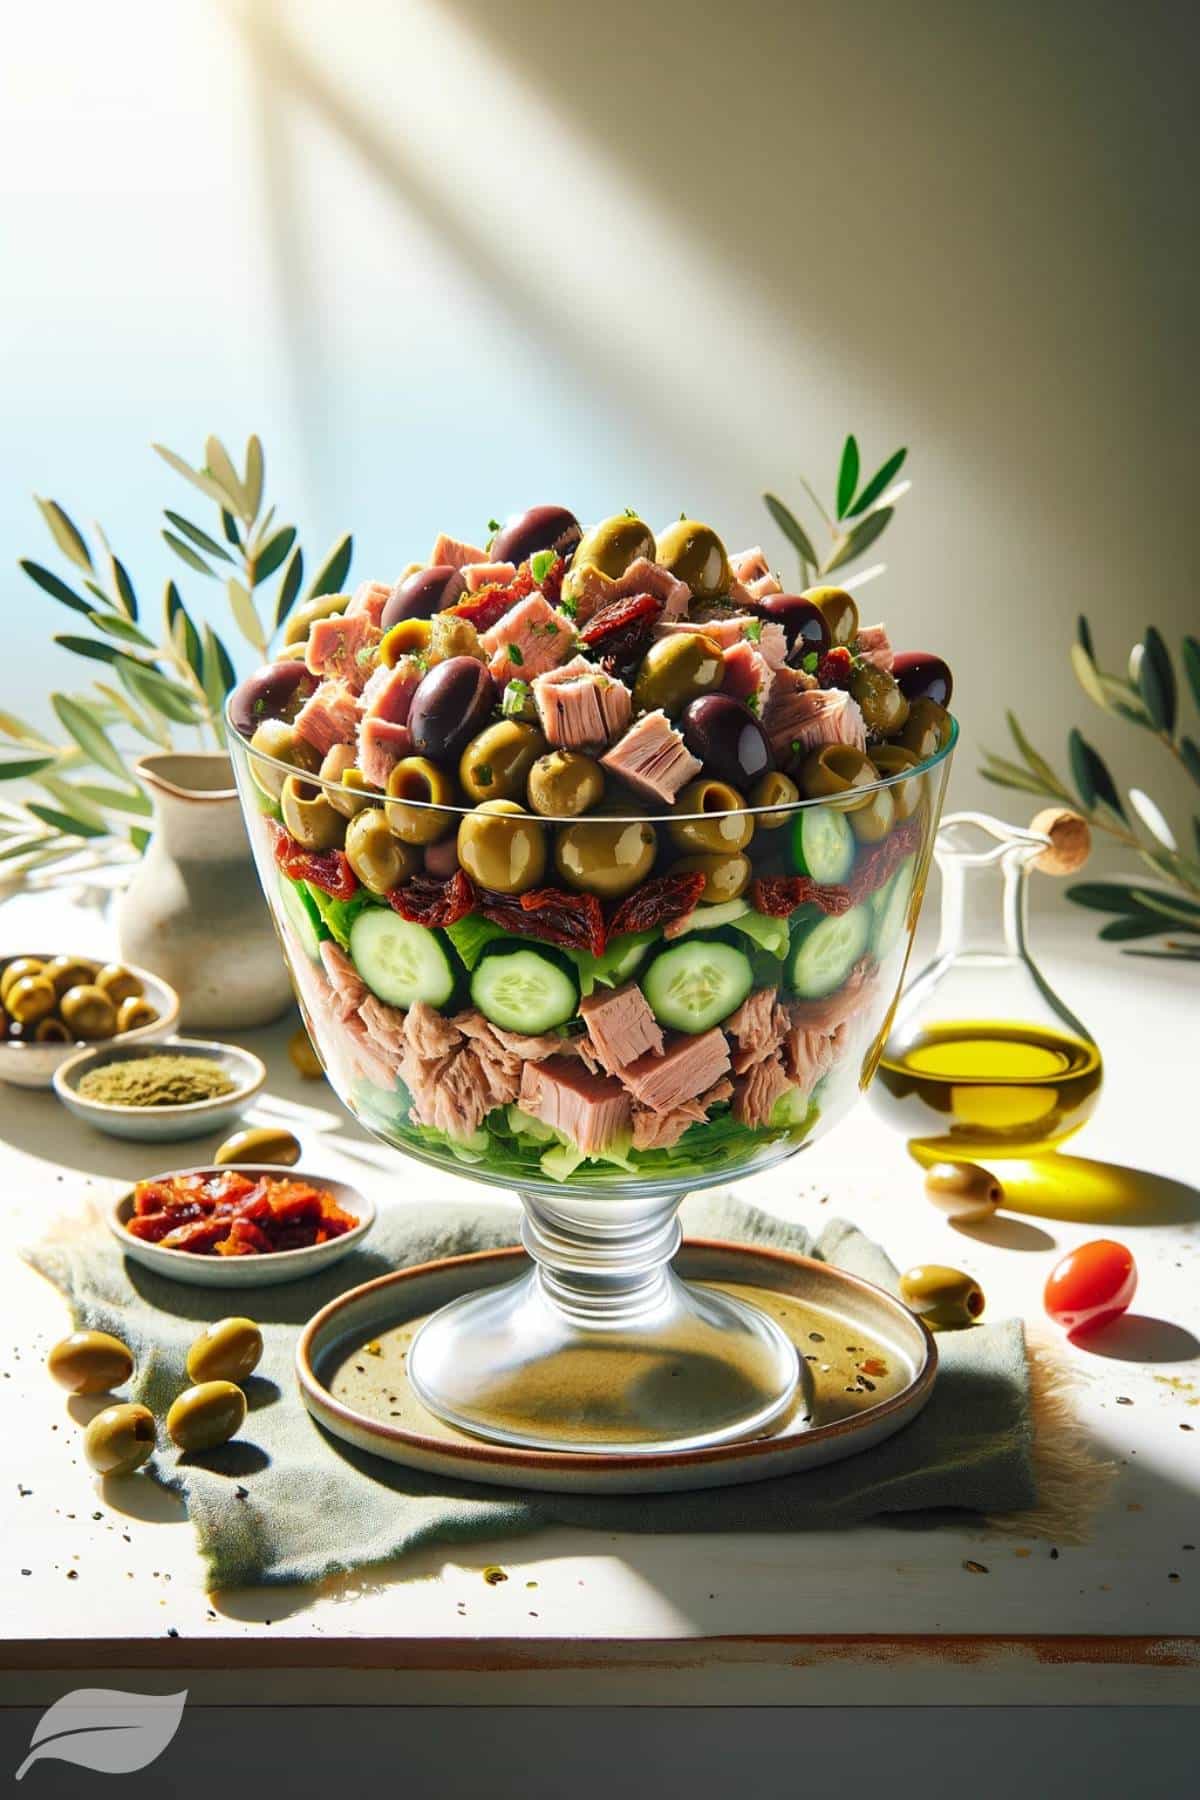 a Mediterranean Tuna Olive Salad, showcasing a close-up view in a tall, elegant glass bowl set on a bright, sunlit table